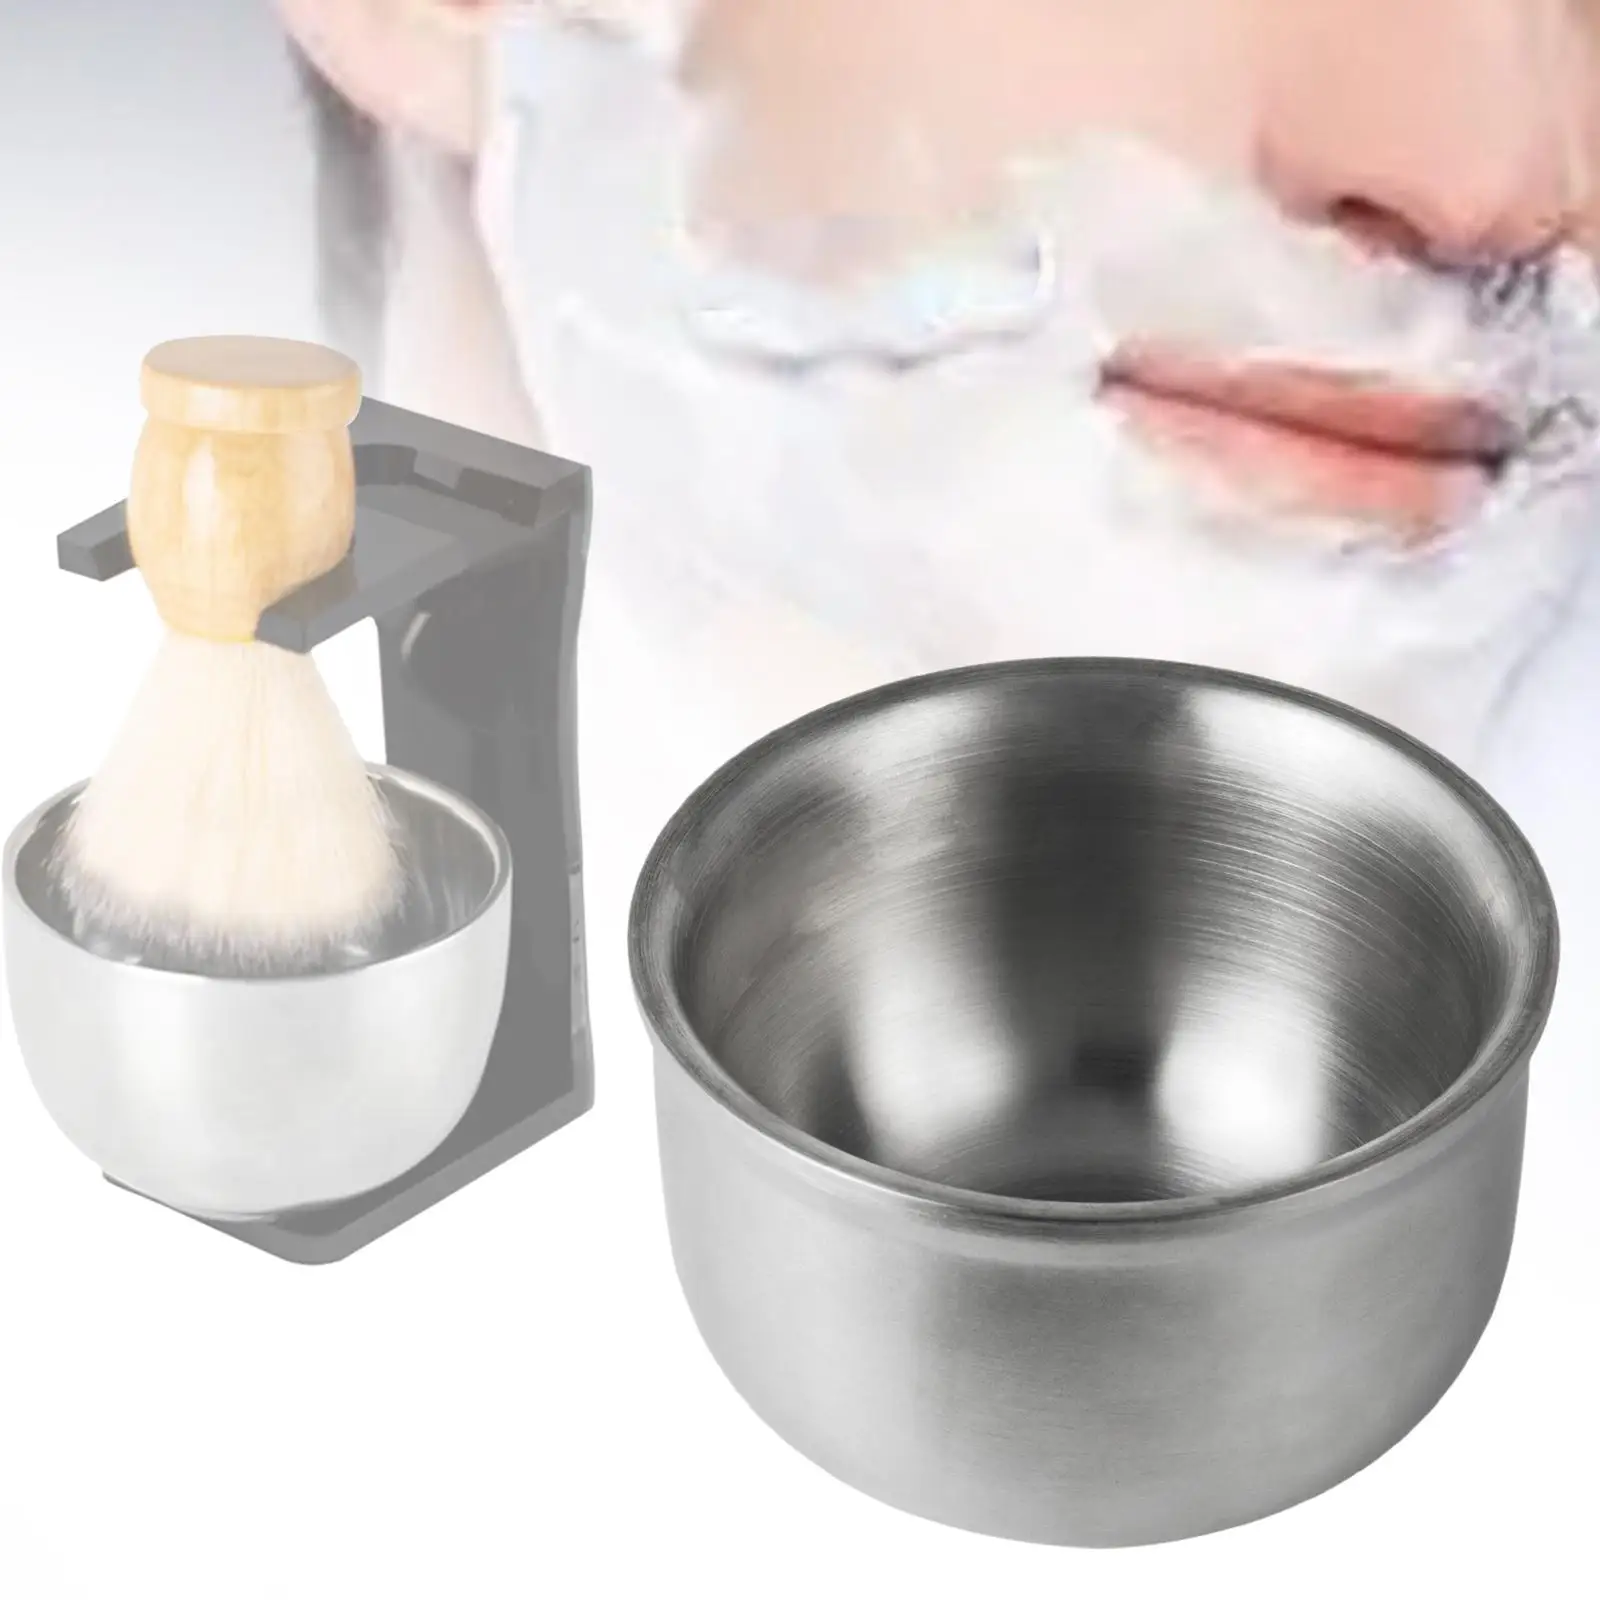 Shaving Soap Bowl Easy to Lather Unbreakable Smooth Durable Keep Warm Better Produce Rich Foam Portable Shaving Cup for Gift Men